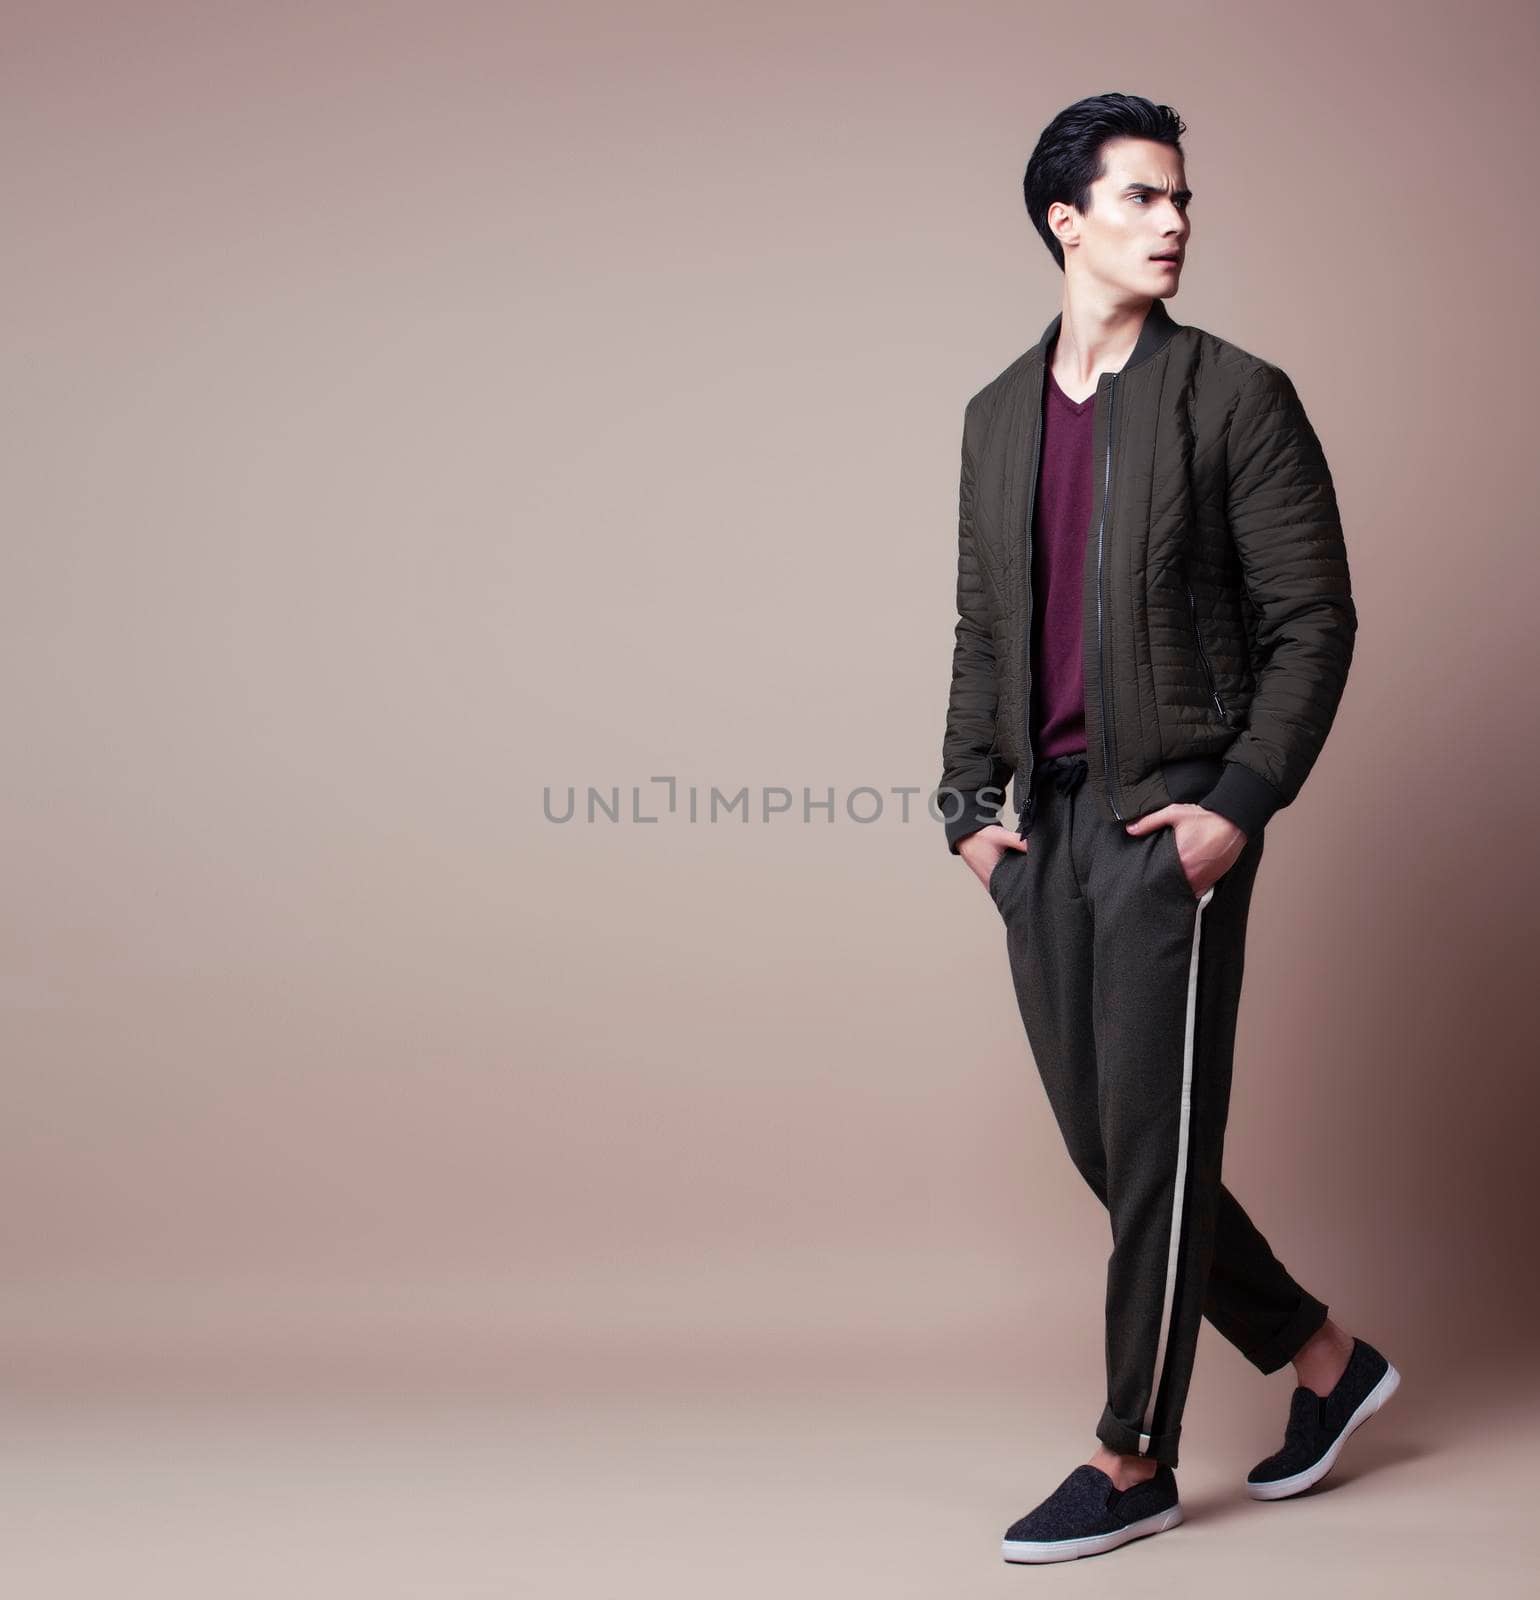 young pretty asian man posing in fashion style on light brown background, lifestyle people concept close up